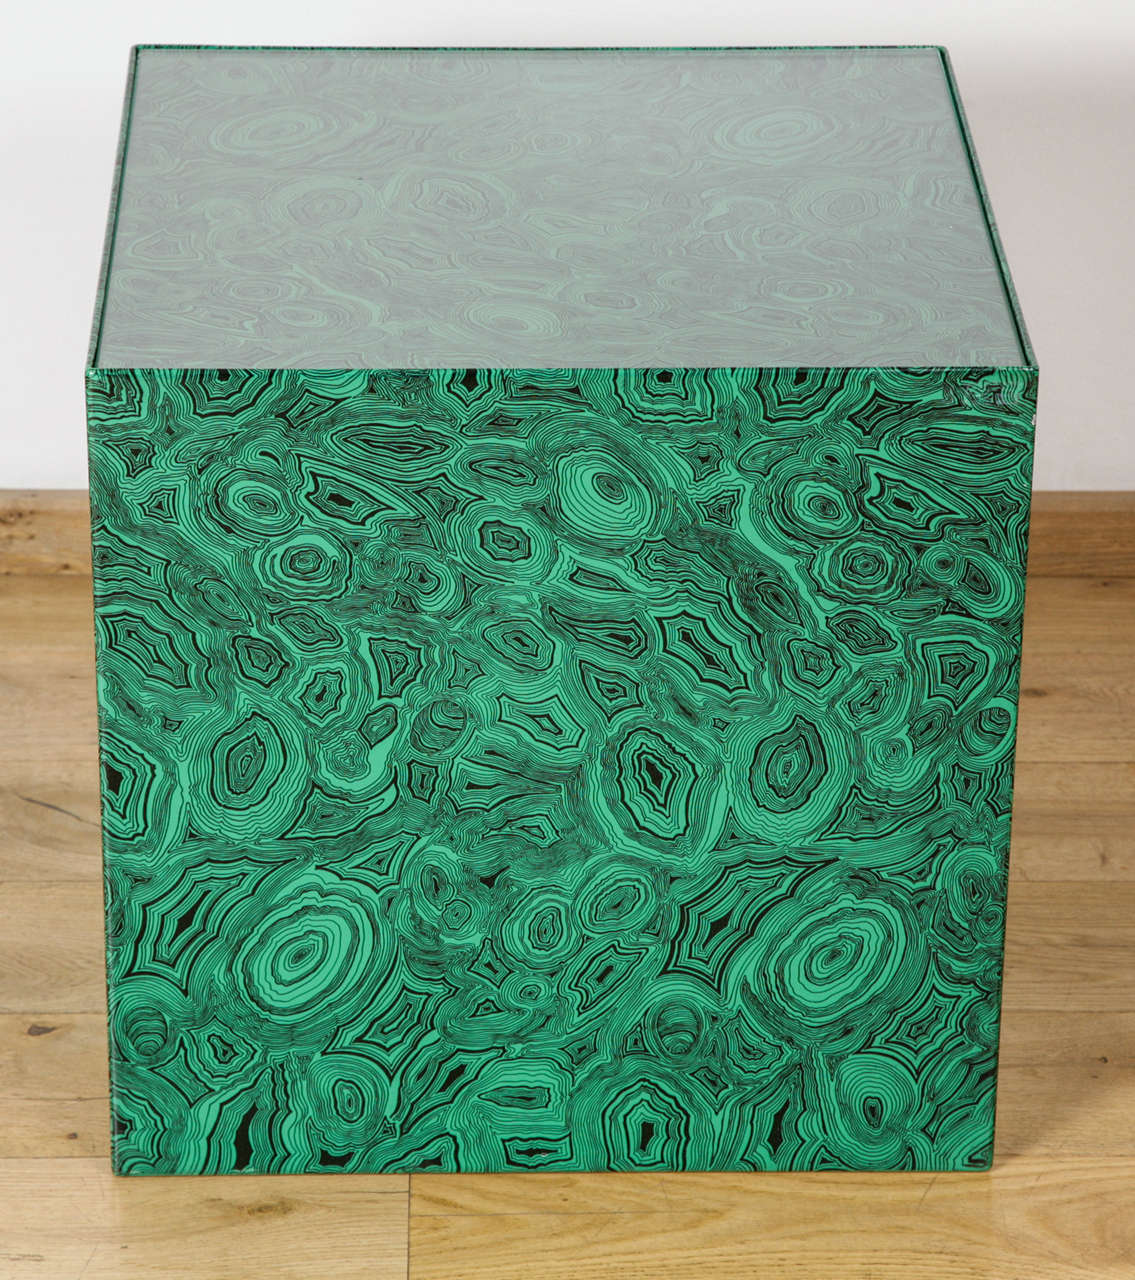 Metal cube, hand-painted to simulate malachite,
with original paper label,
glass top replaced.